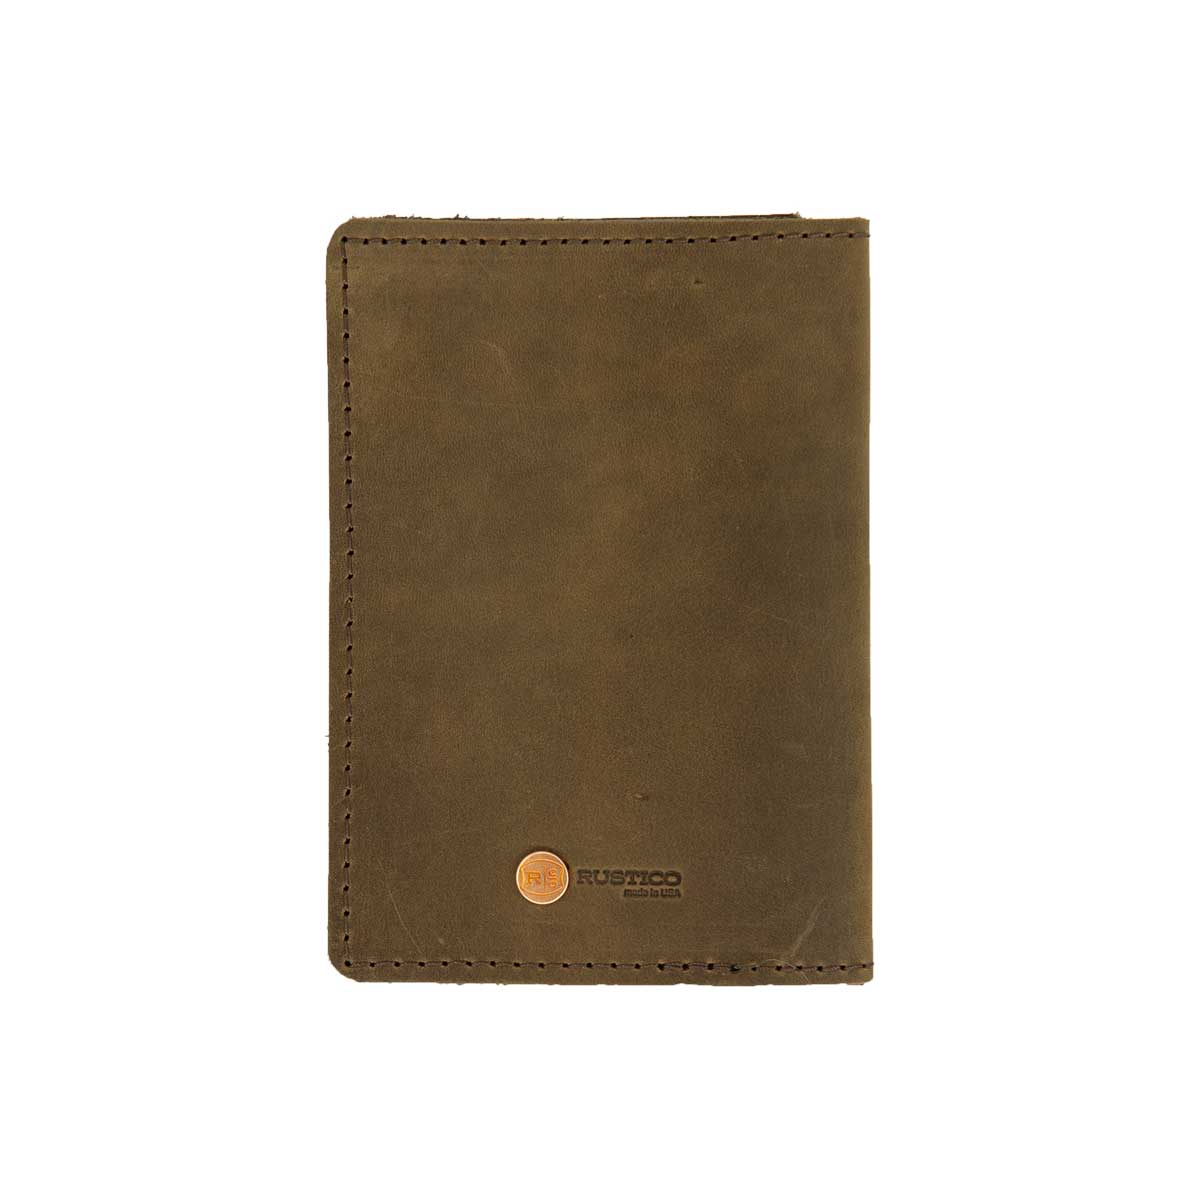 Leather Passport and Vax Card Holder